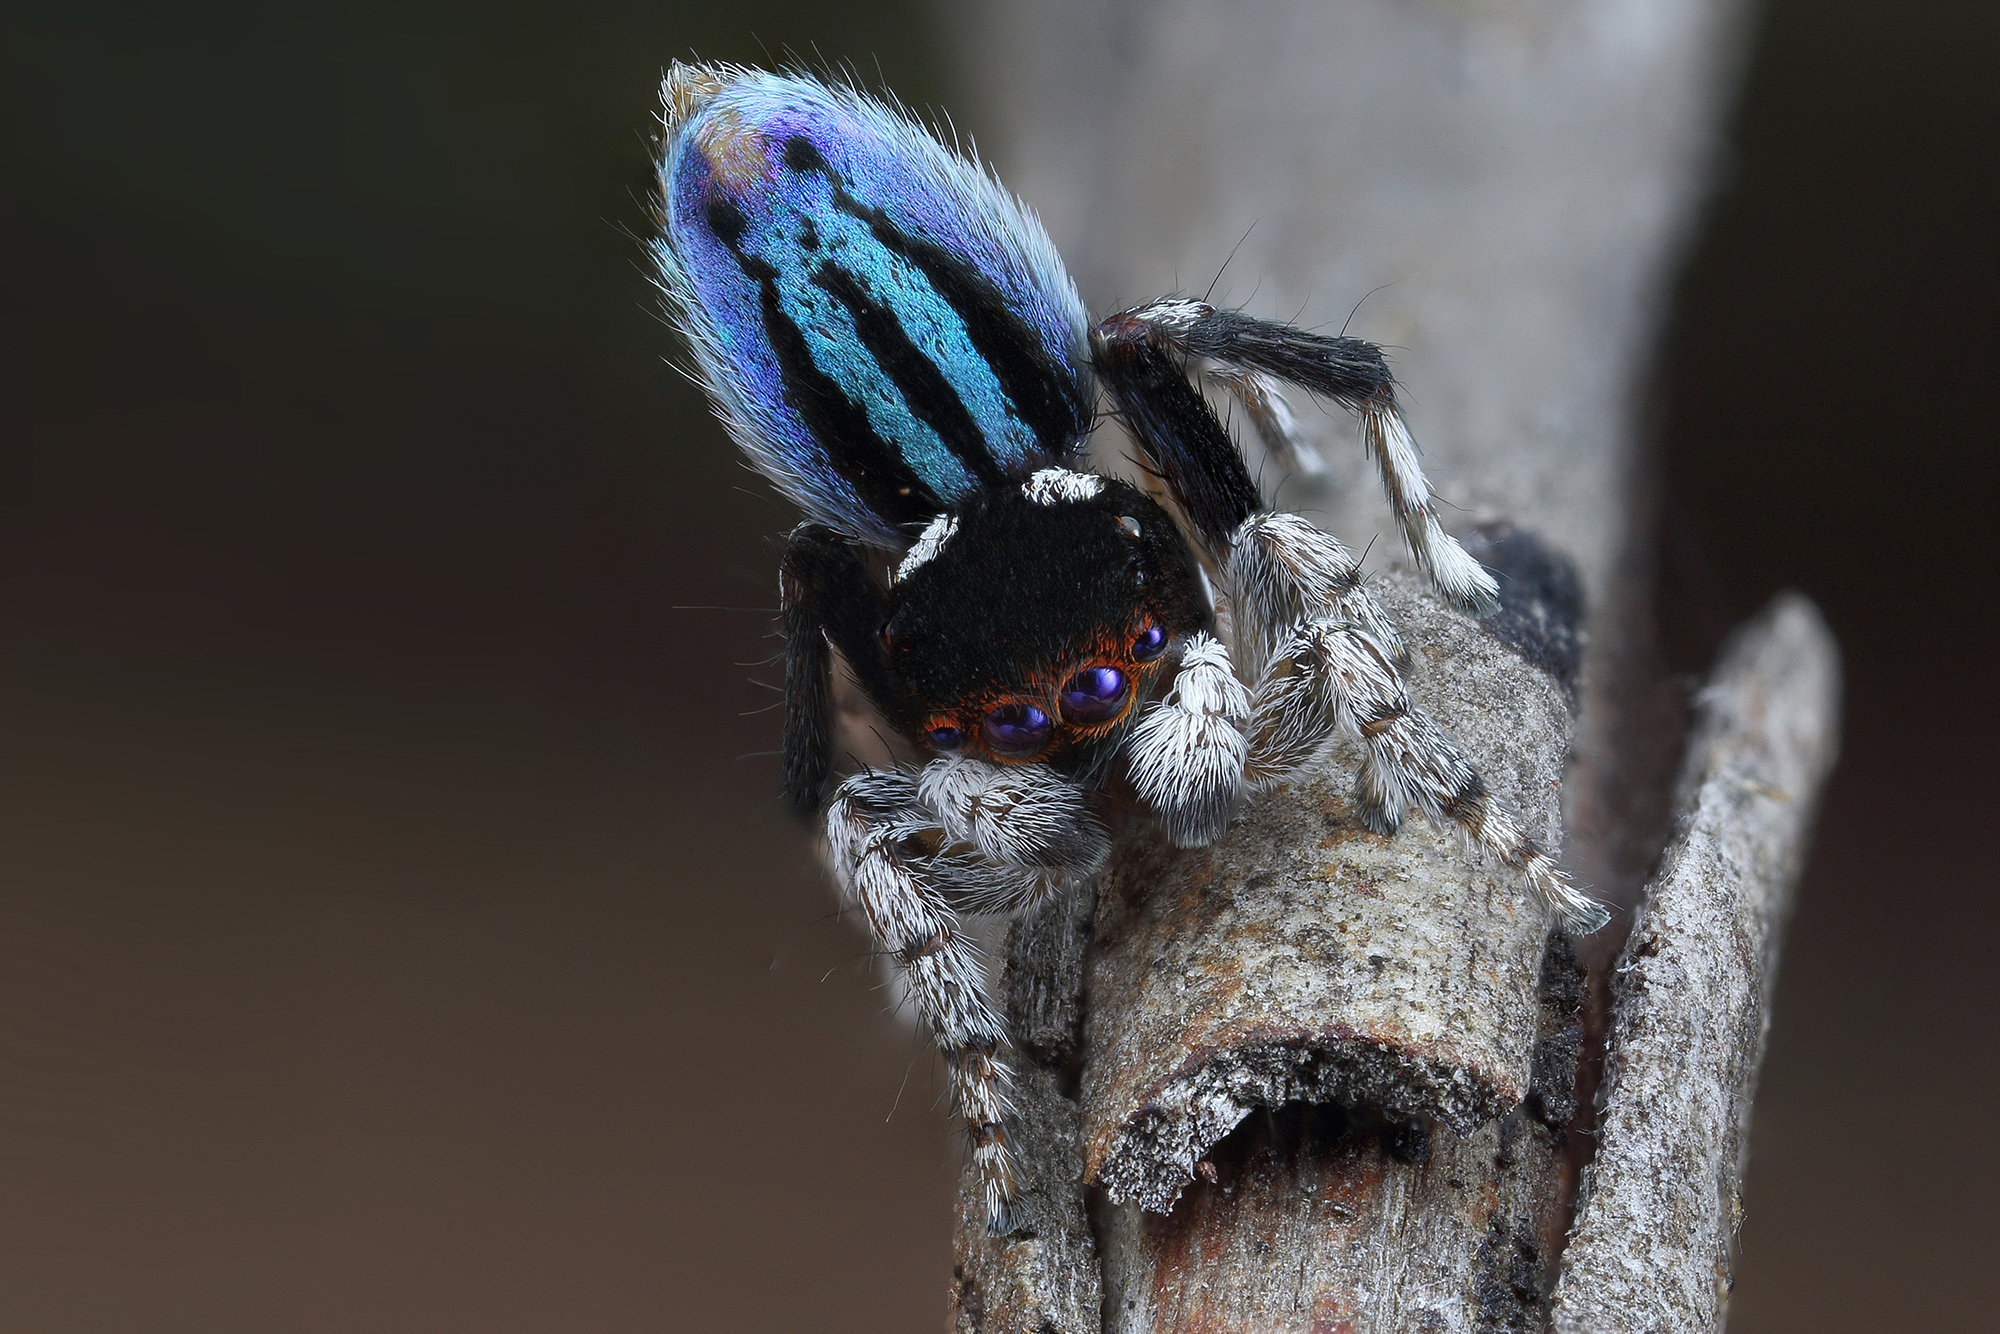 Seven New Species of Australian Peacock Spiders Discovered, Biology